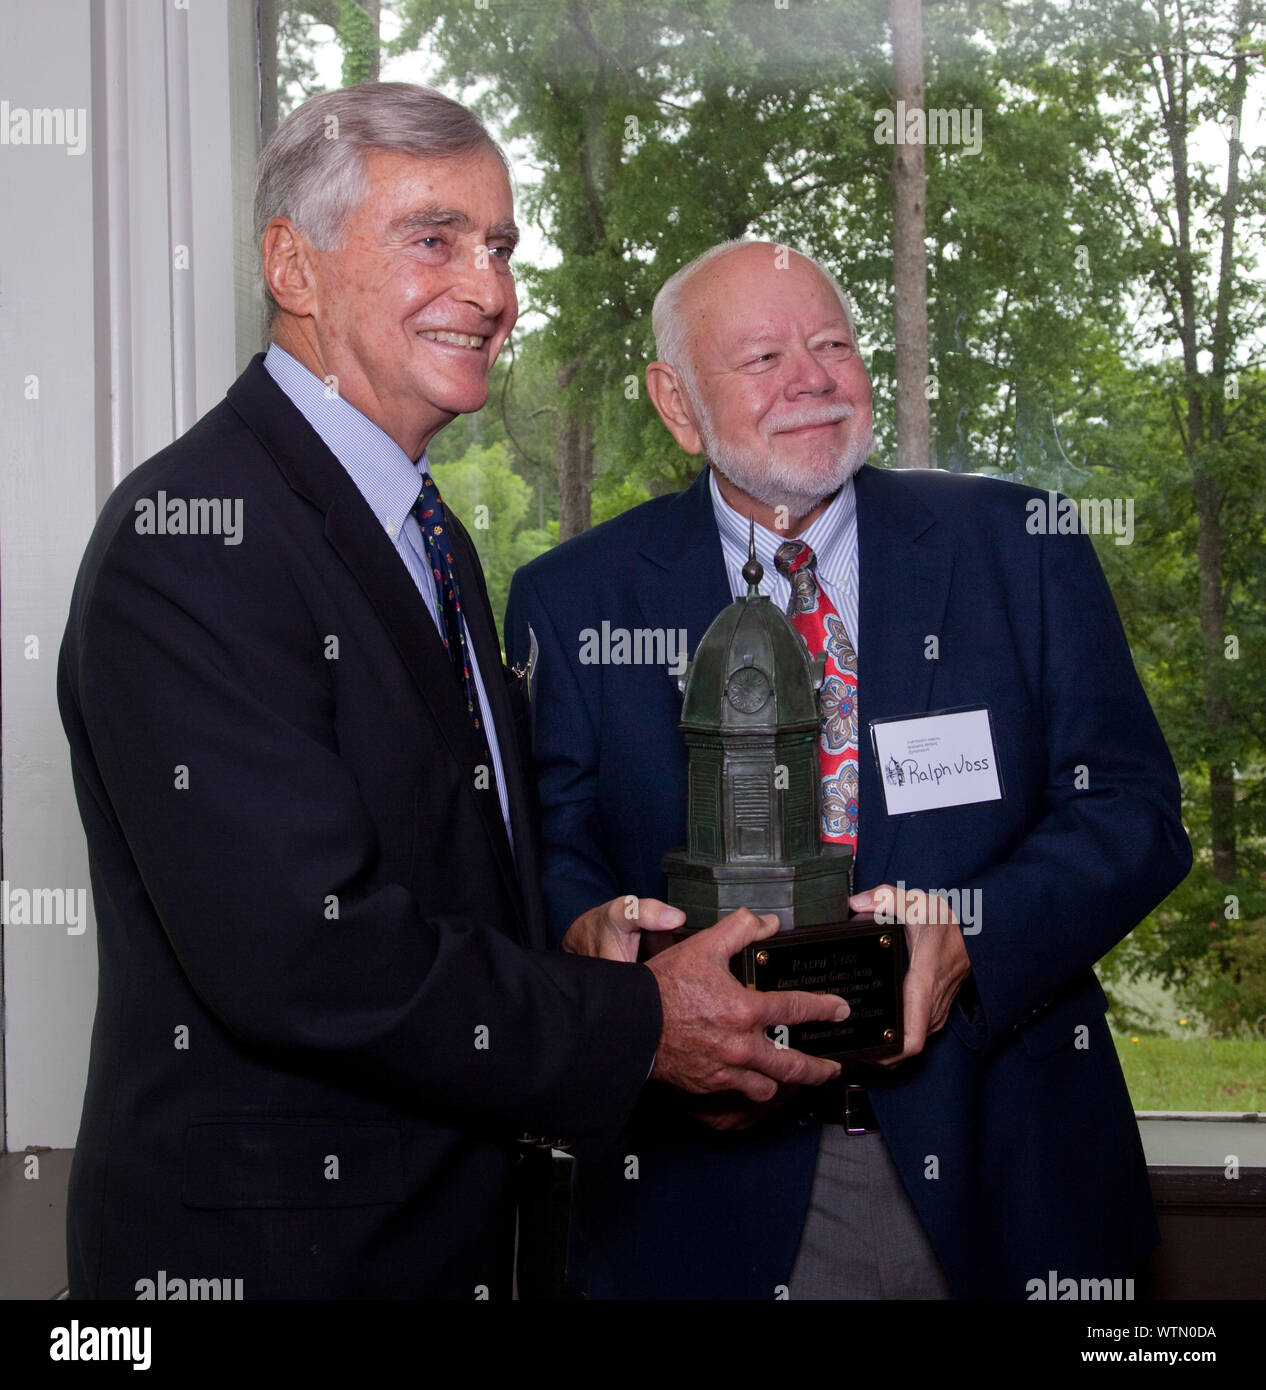 Mr. George F. Landegger and Ralph Voss speak at the podium at the 13th Annual Alabama Writers Symposium in Monroeville, Alabama Stock Photo